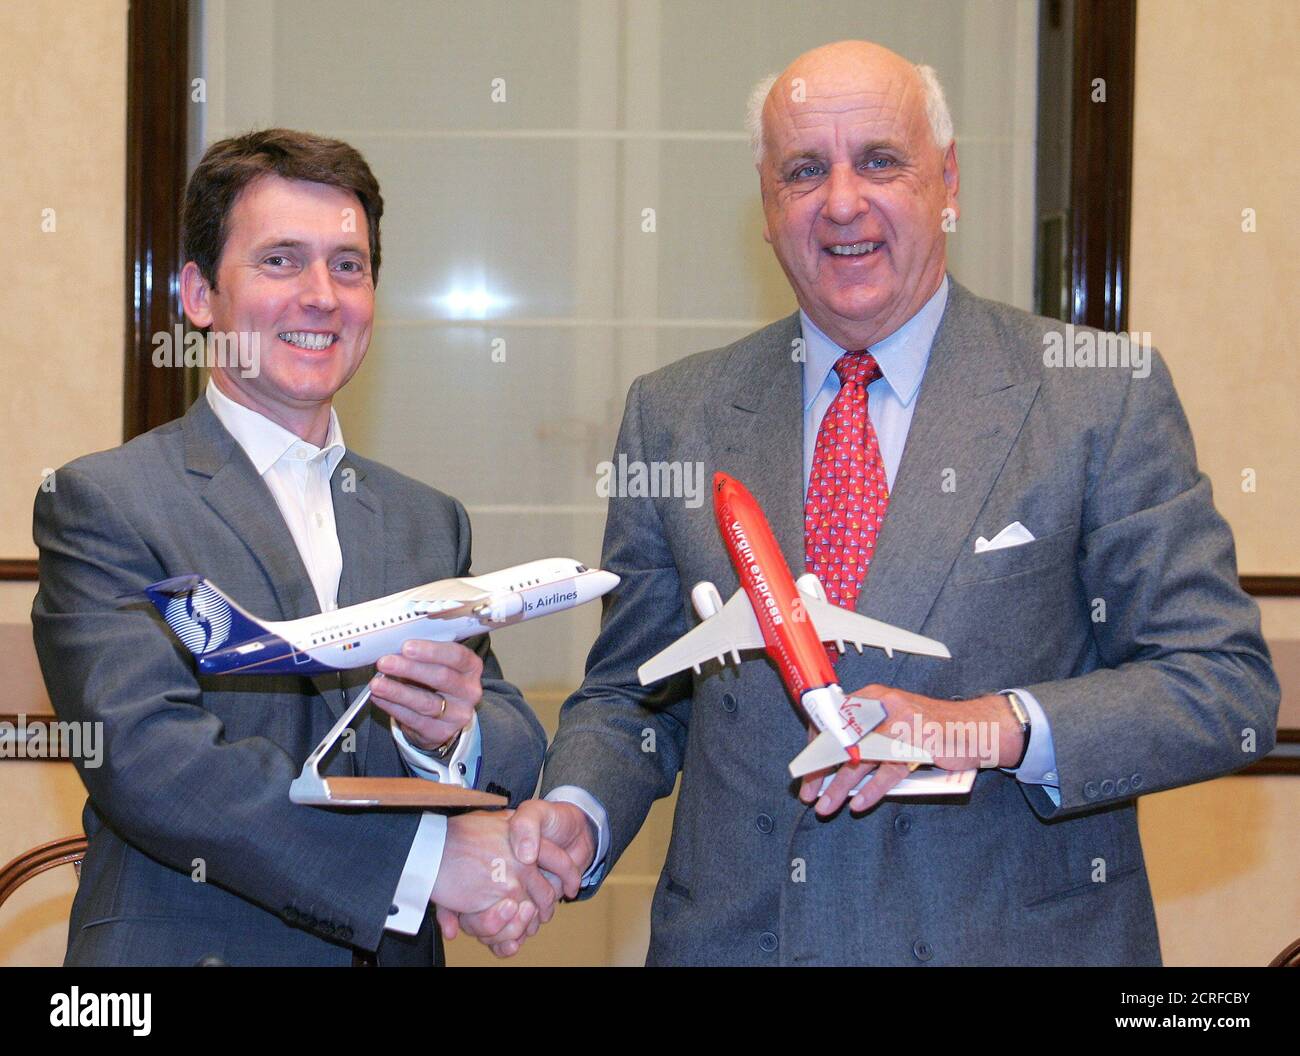 Virgin Management's Chief Executive Officer Stephen Murphy (L) shakes hands with SN Airholding Chairman Etienne Davignon (R) at the start of a news conference in Brussels October 6, 2004. Full-fare operator SN Brussels Airlines said on Wednesday it had finalised its planned tie-up with low-cost carrier Virgin Express, in a deal that ends rivalry between the two companies based at Brussels's main airport. REUTERS/Thierry Roge  THR/acm Stock Photo